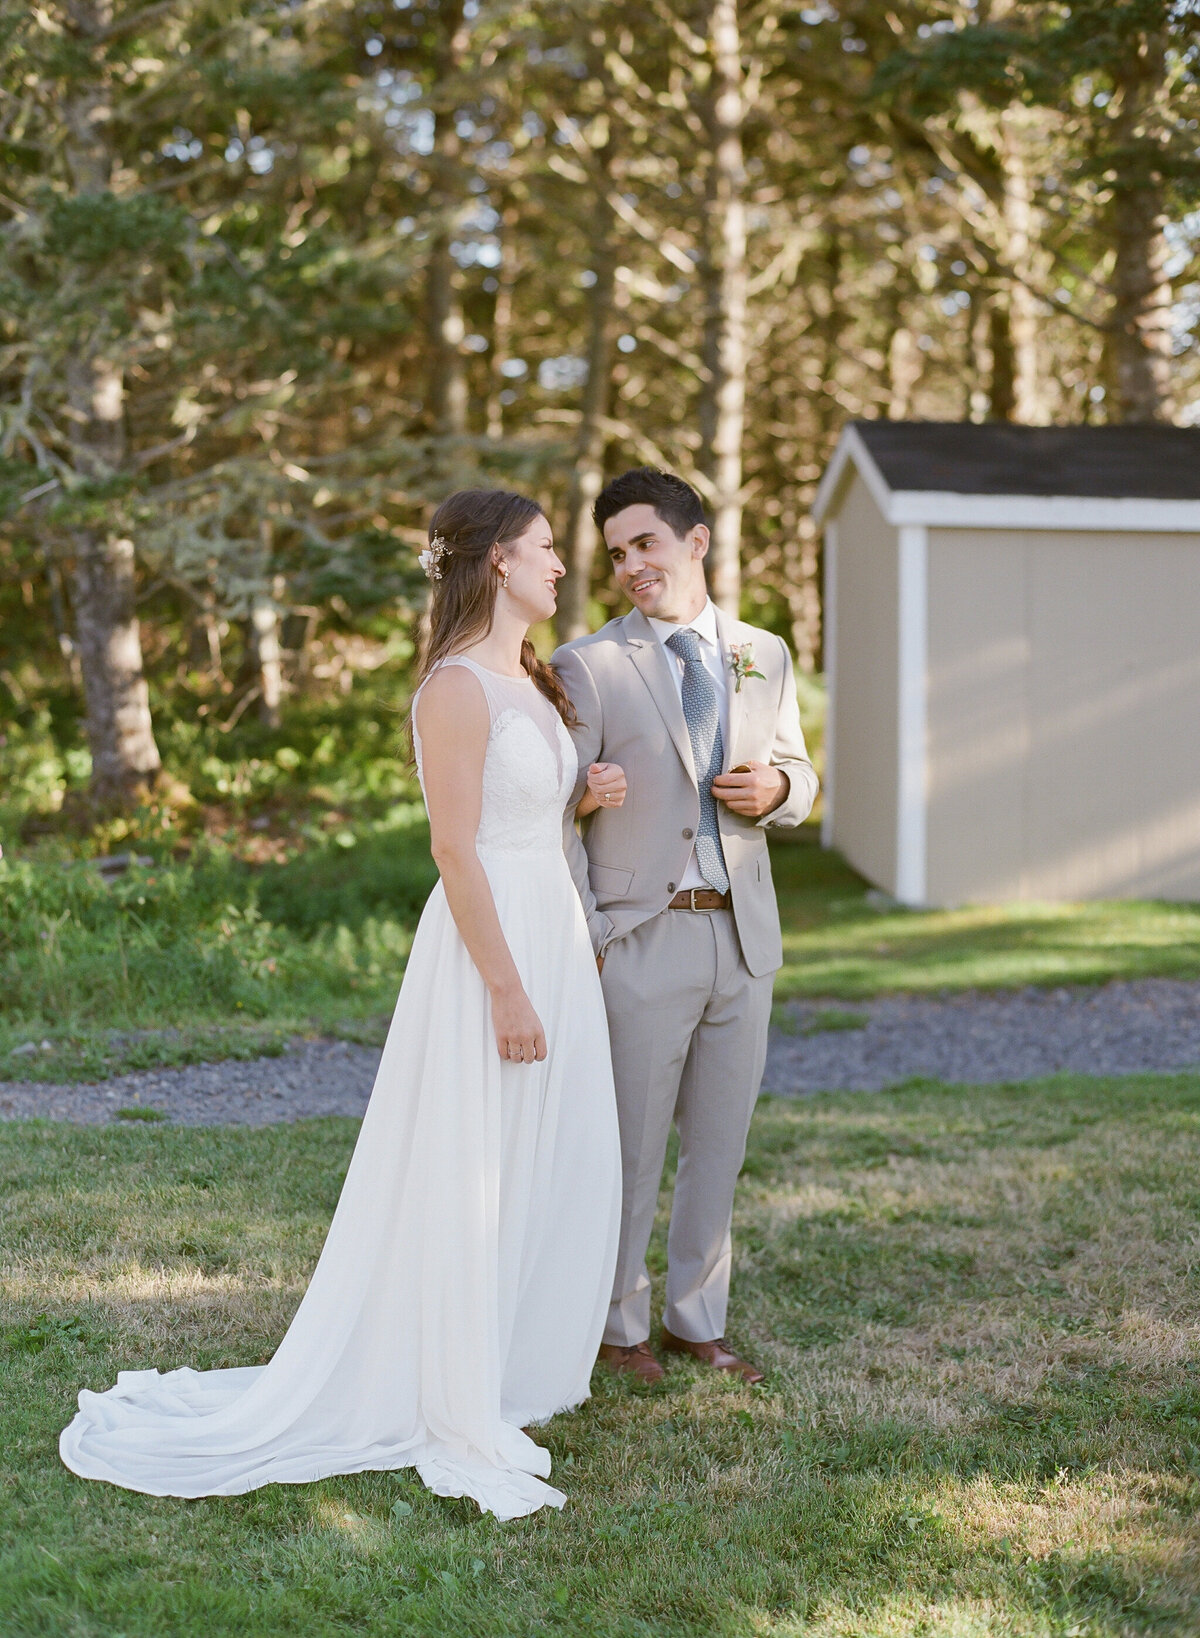 Jacqueline Anne Photography - Halifax Wedding Photographer - Jaclyn and Morgan-52